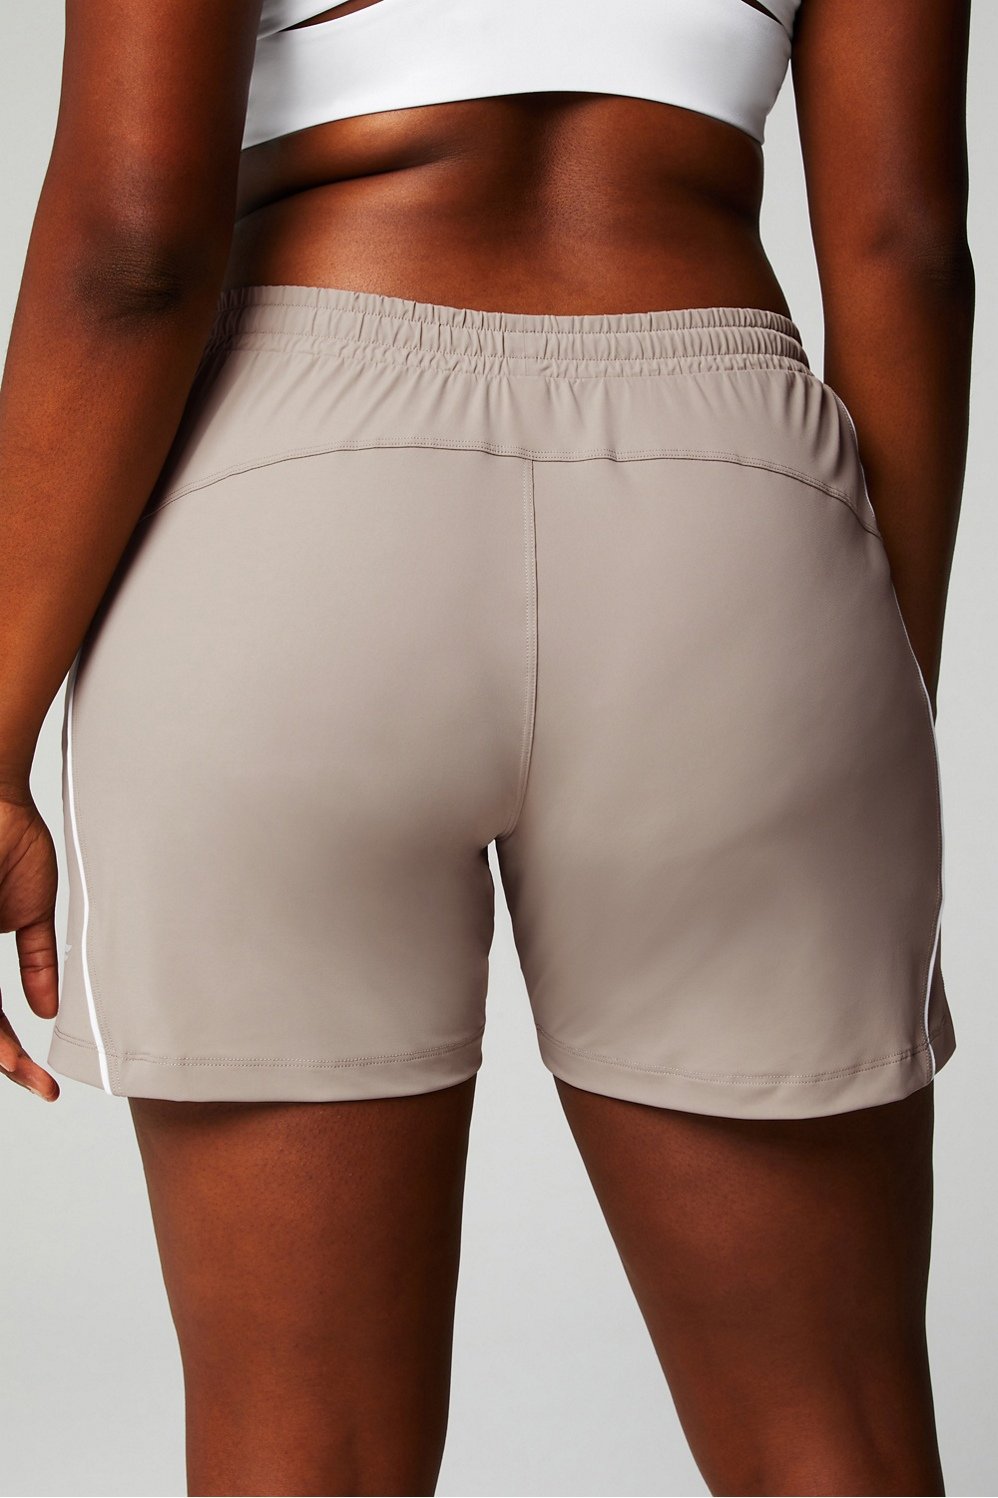 The Piped One Short 5 - Women's - Fabletics